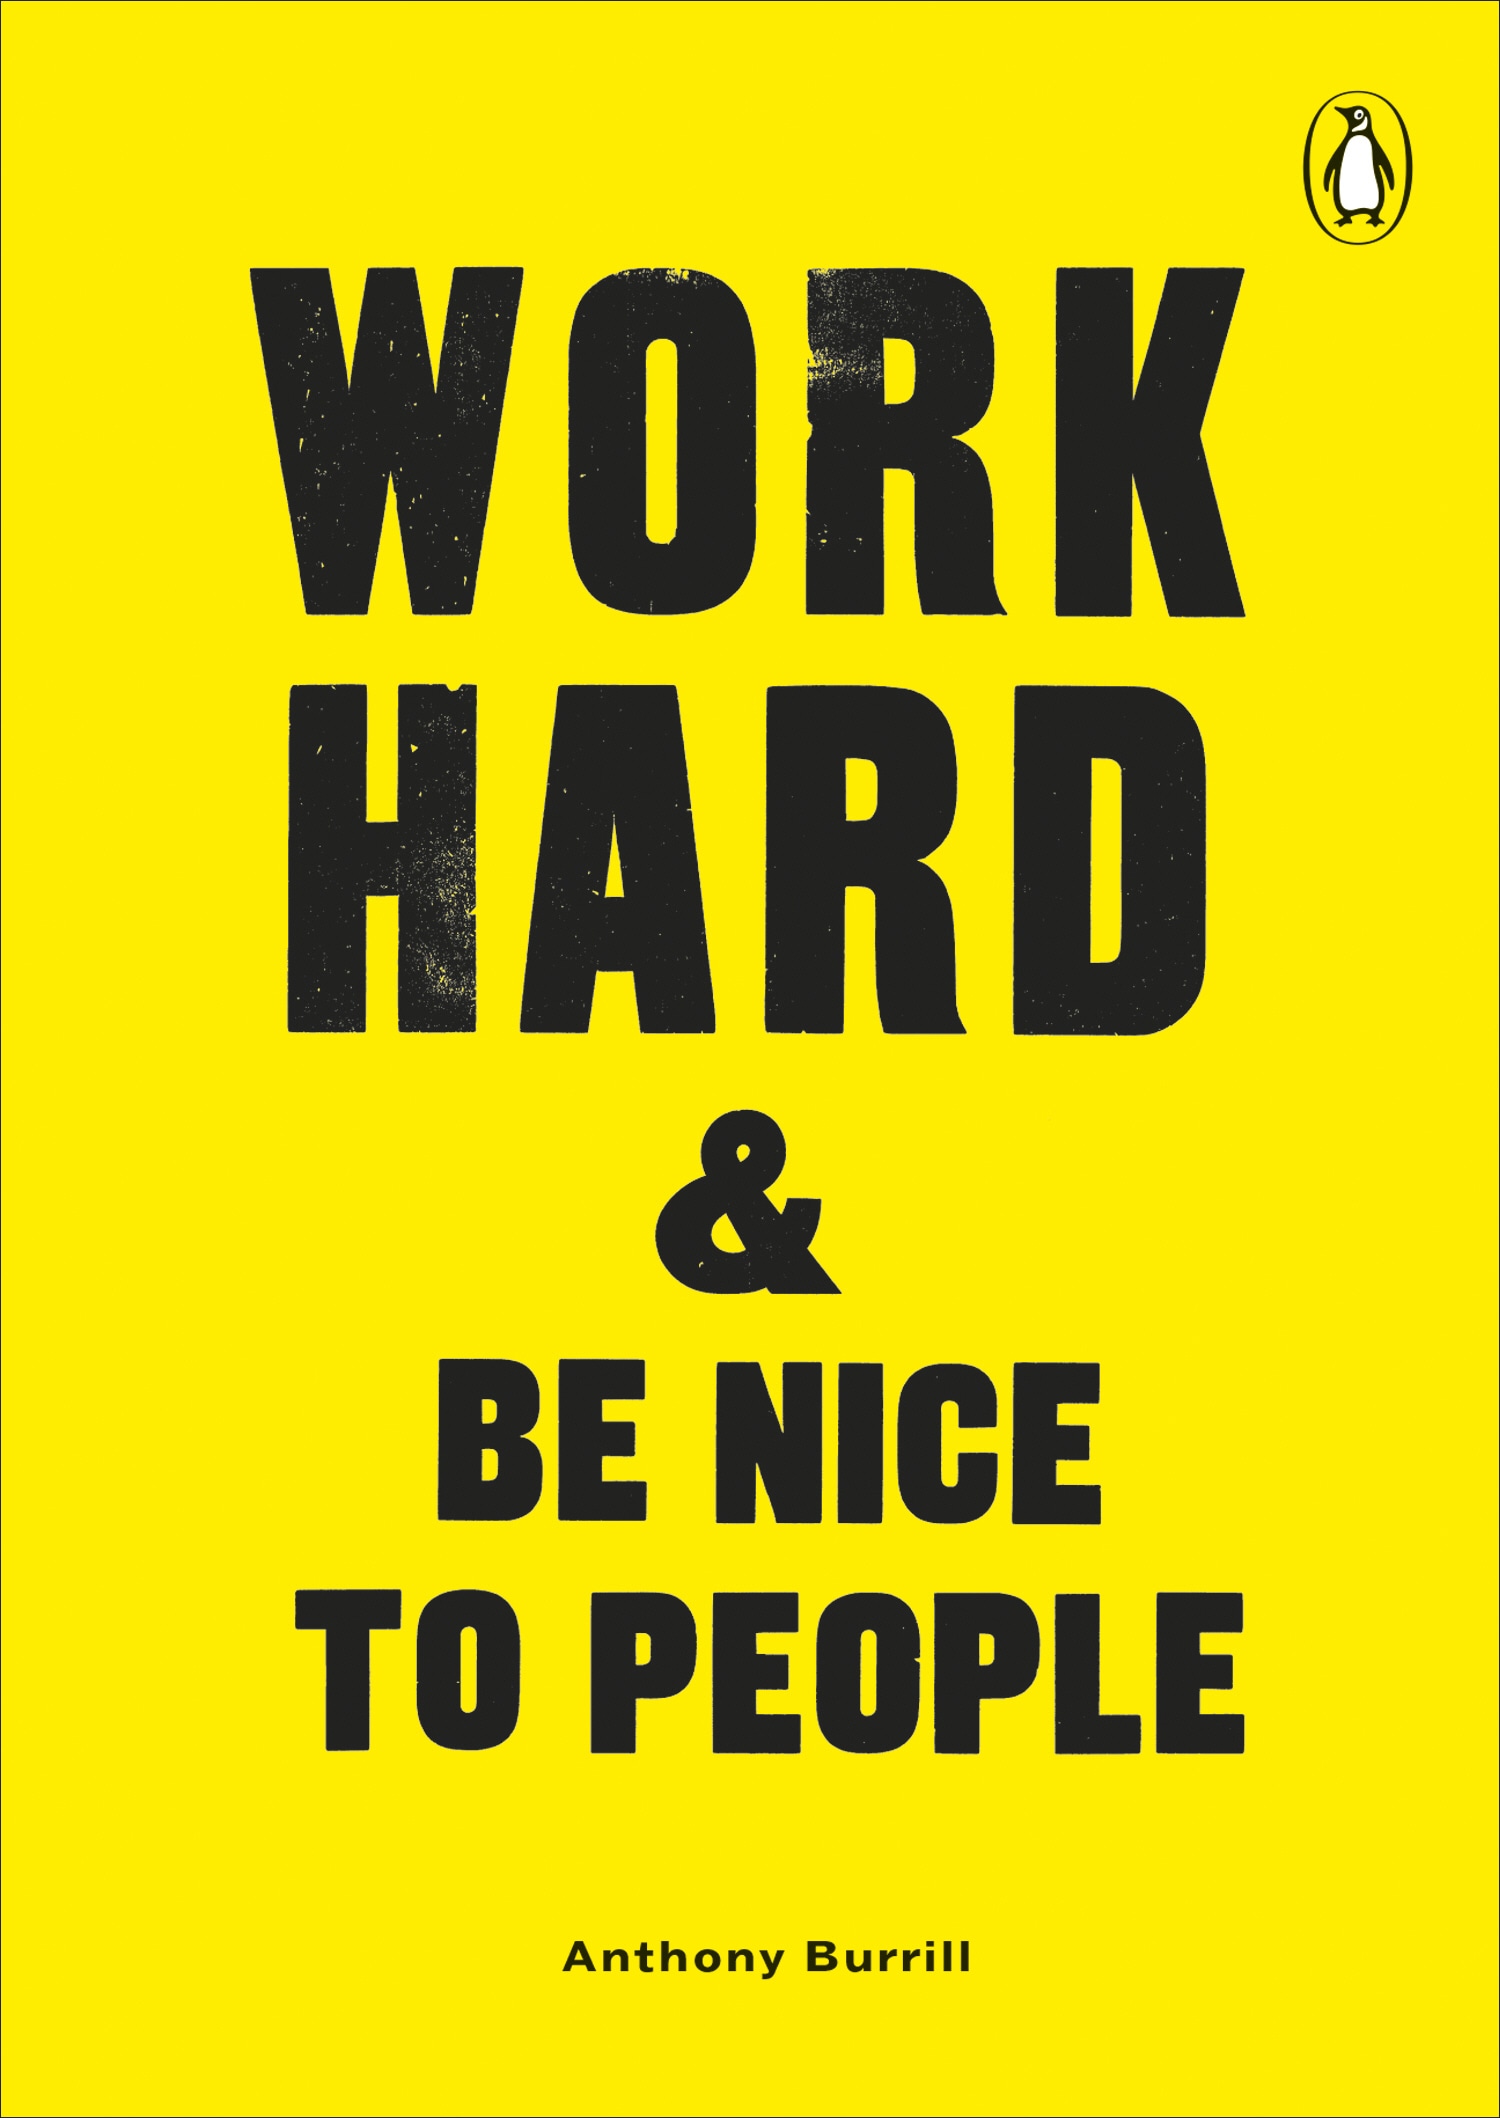 Book “Work Hard & Be Nice to People” by Anthony Burrill — January 1, 2099